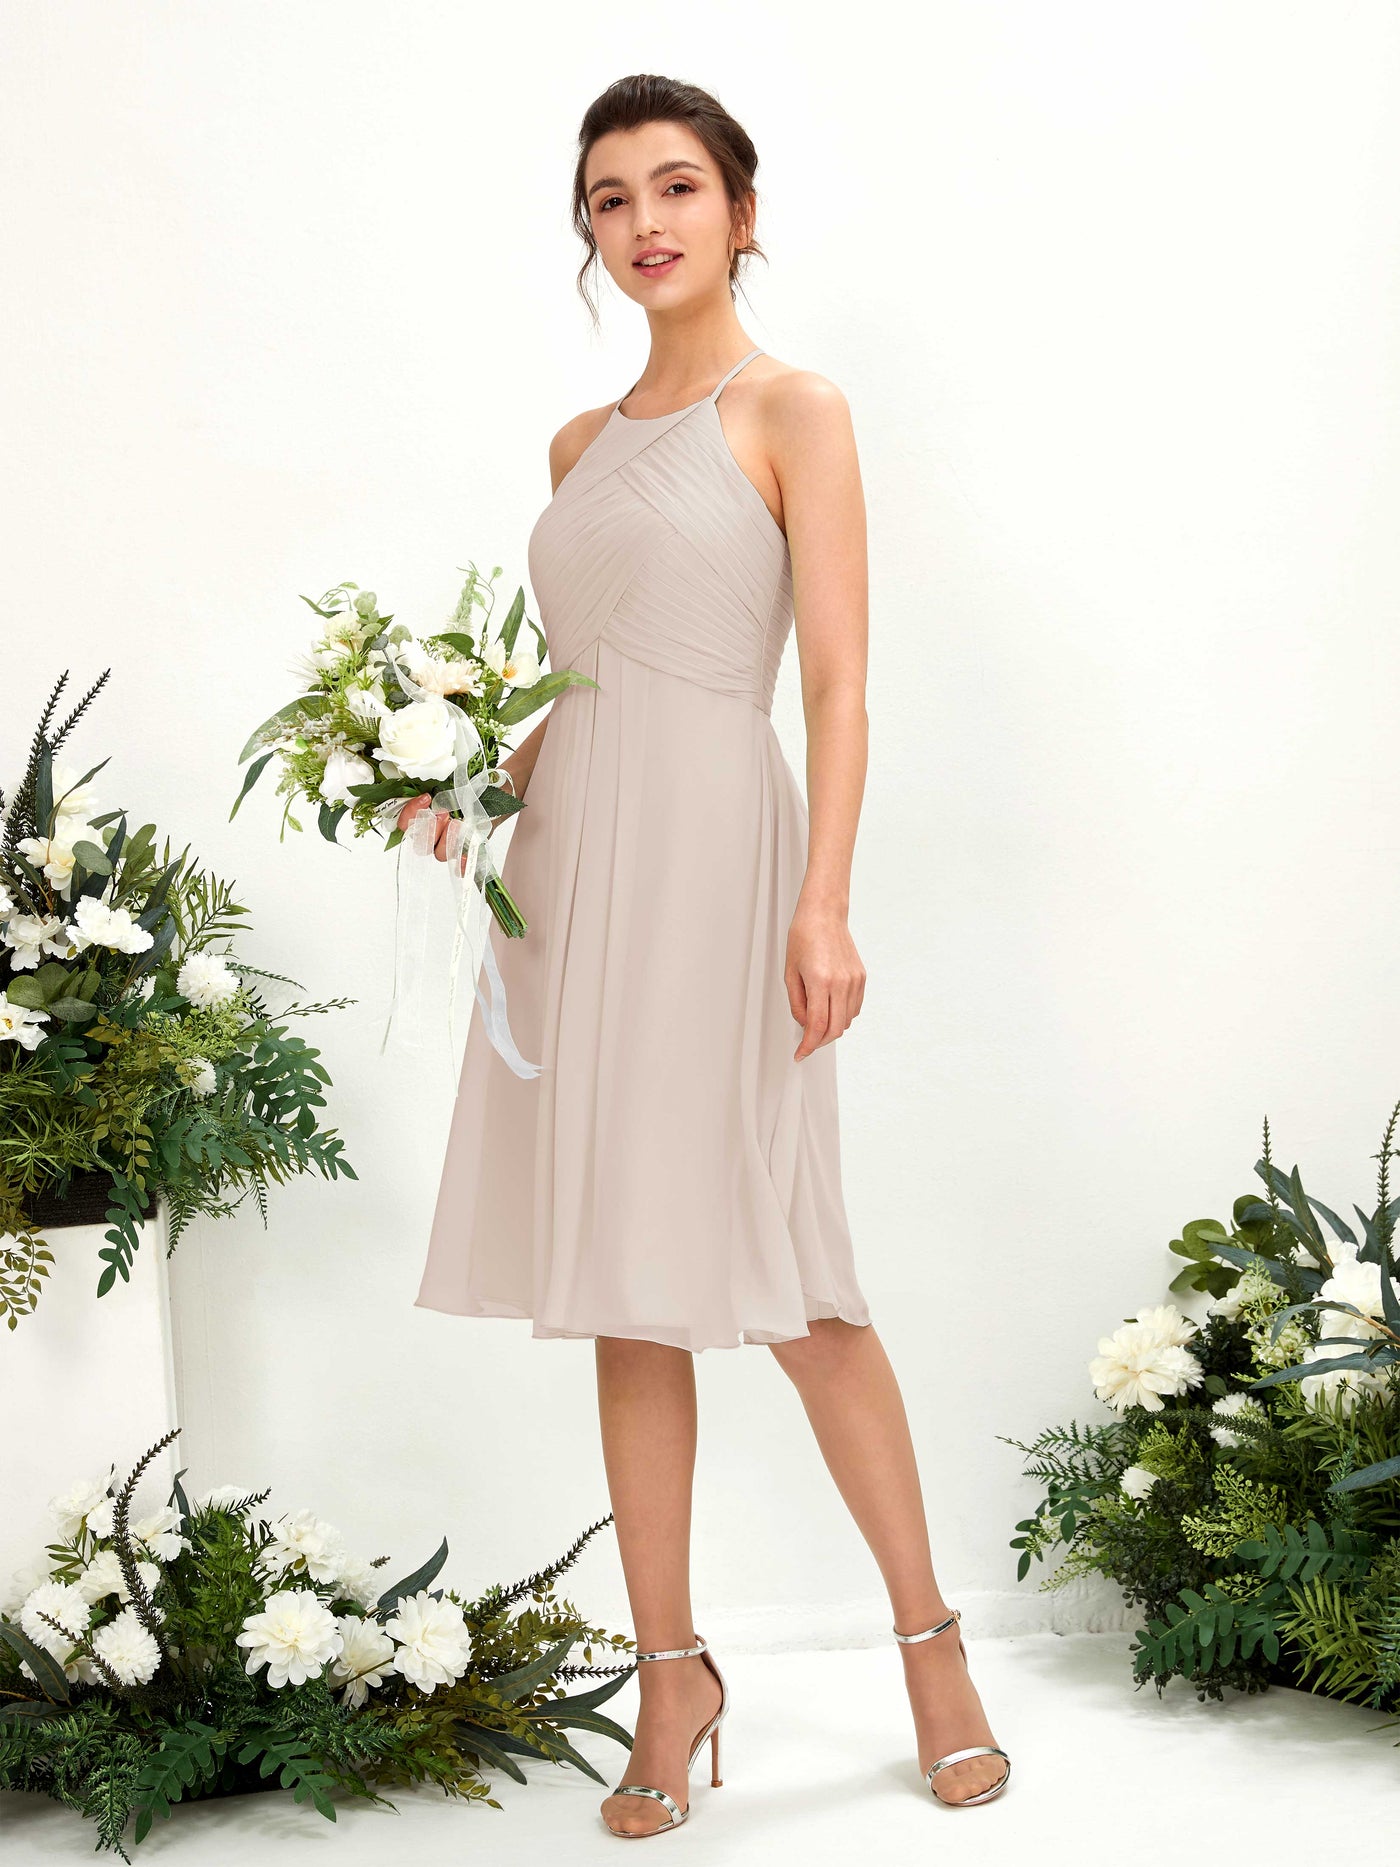 Champagne Bridesmaid Dresses Bridesmaid Dress A-line Chiffon Halter Knee Length Sleeveless Wedding Party Dress (81220416)#color_champagne